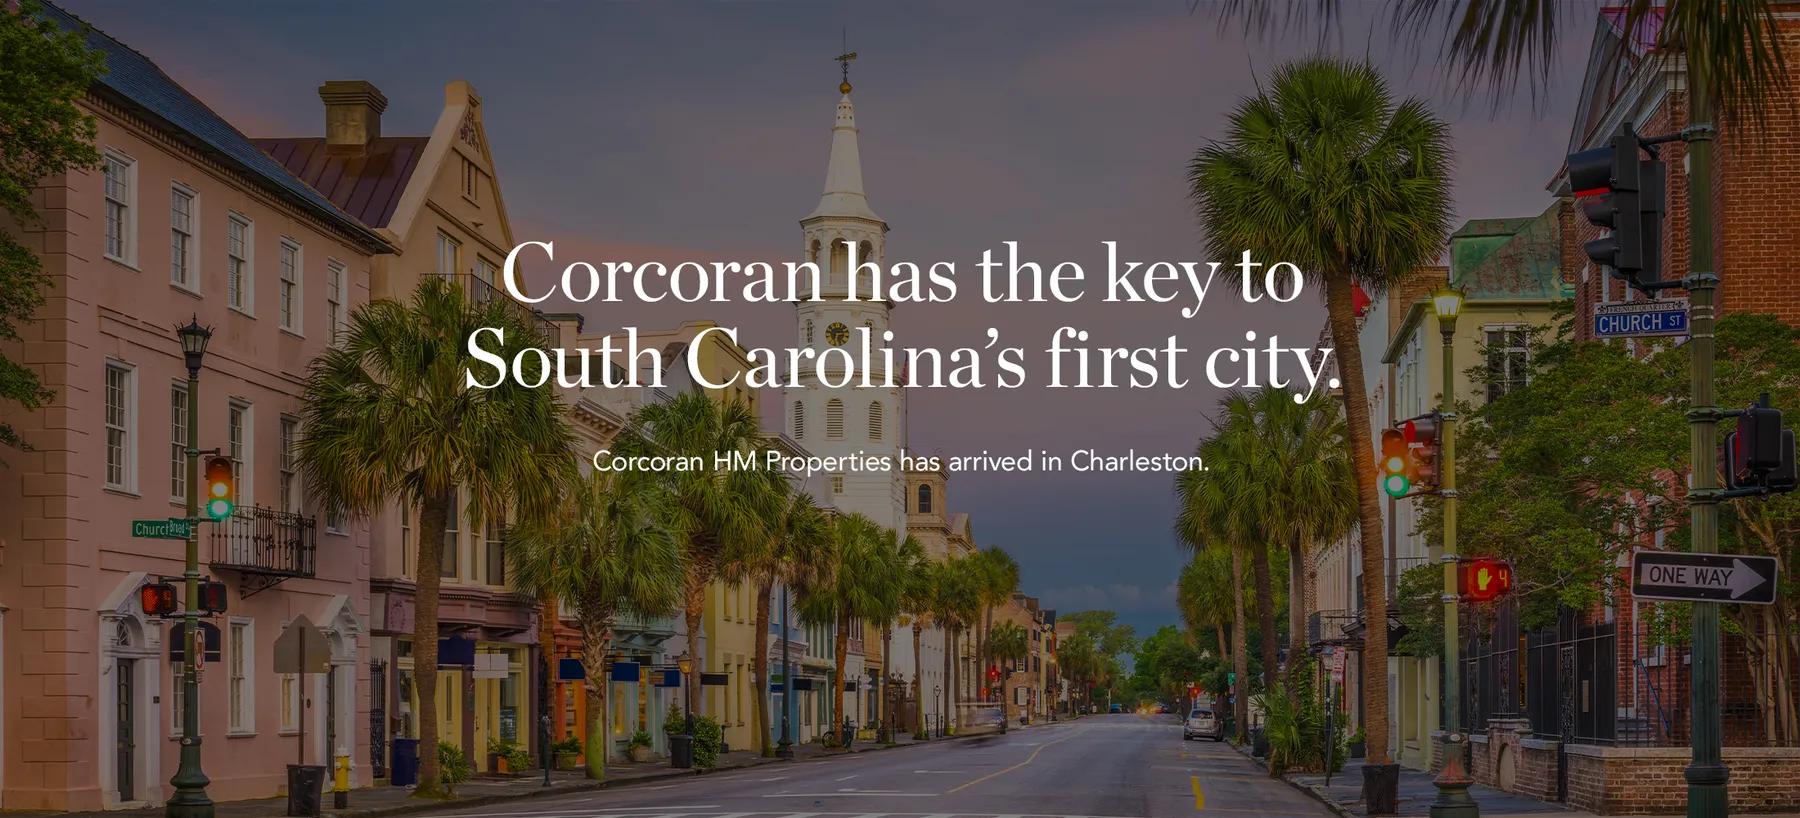 Corcoran has the key to South Carolina's first city. Corcoran HM Properties has arrived in Charleston. 